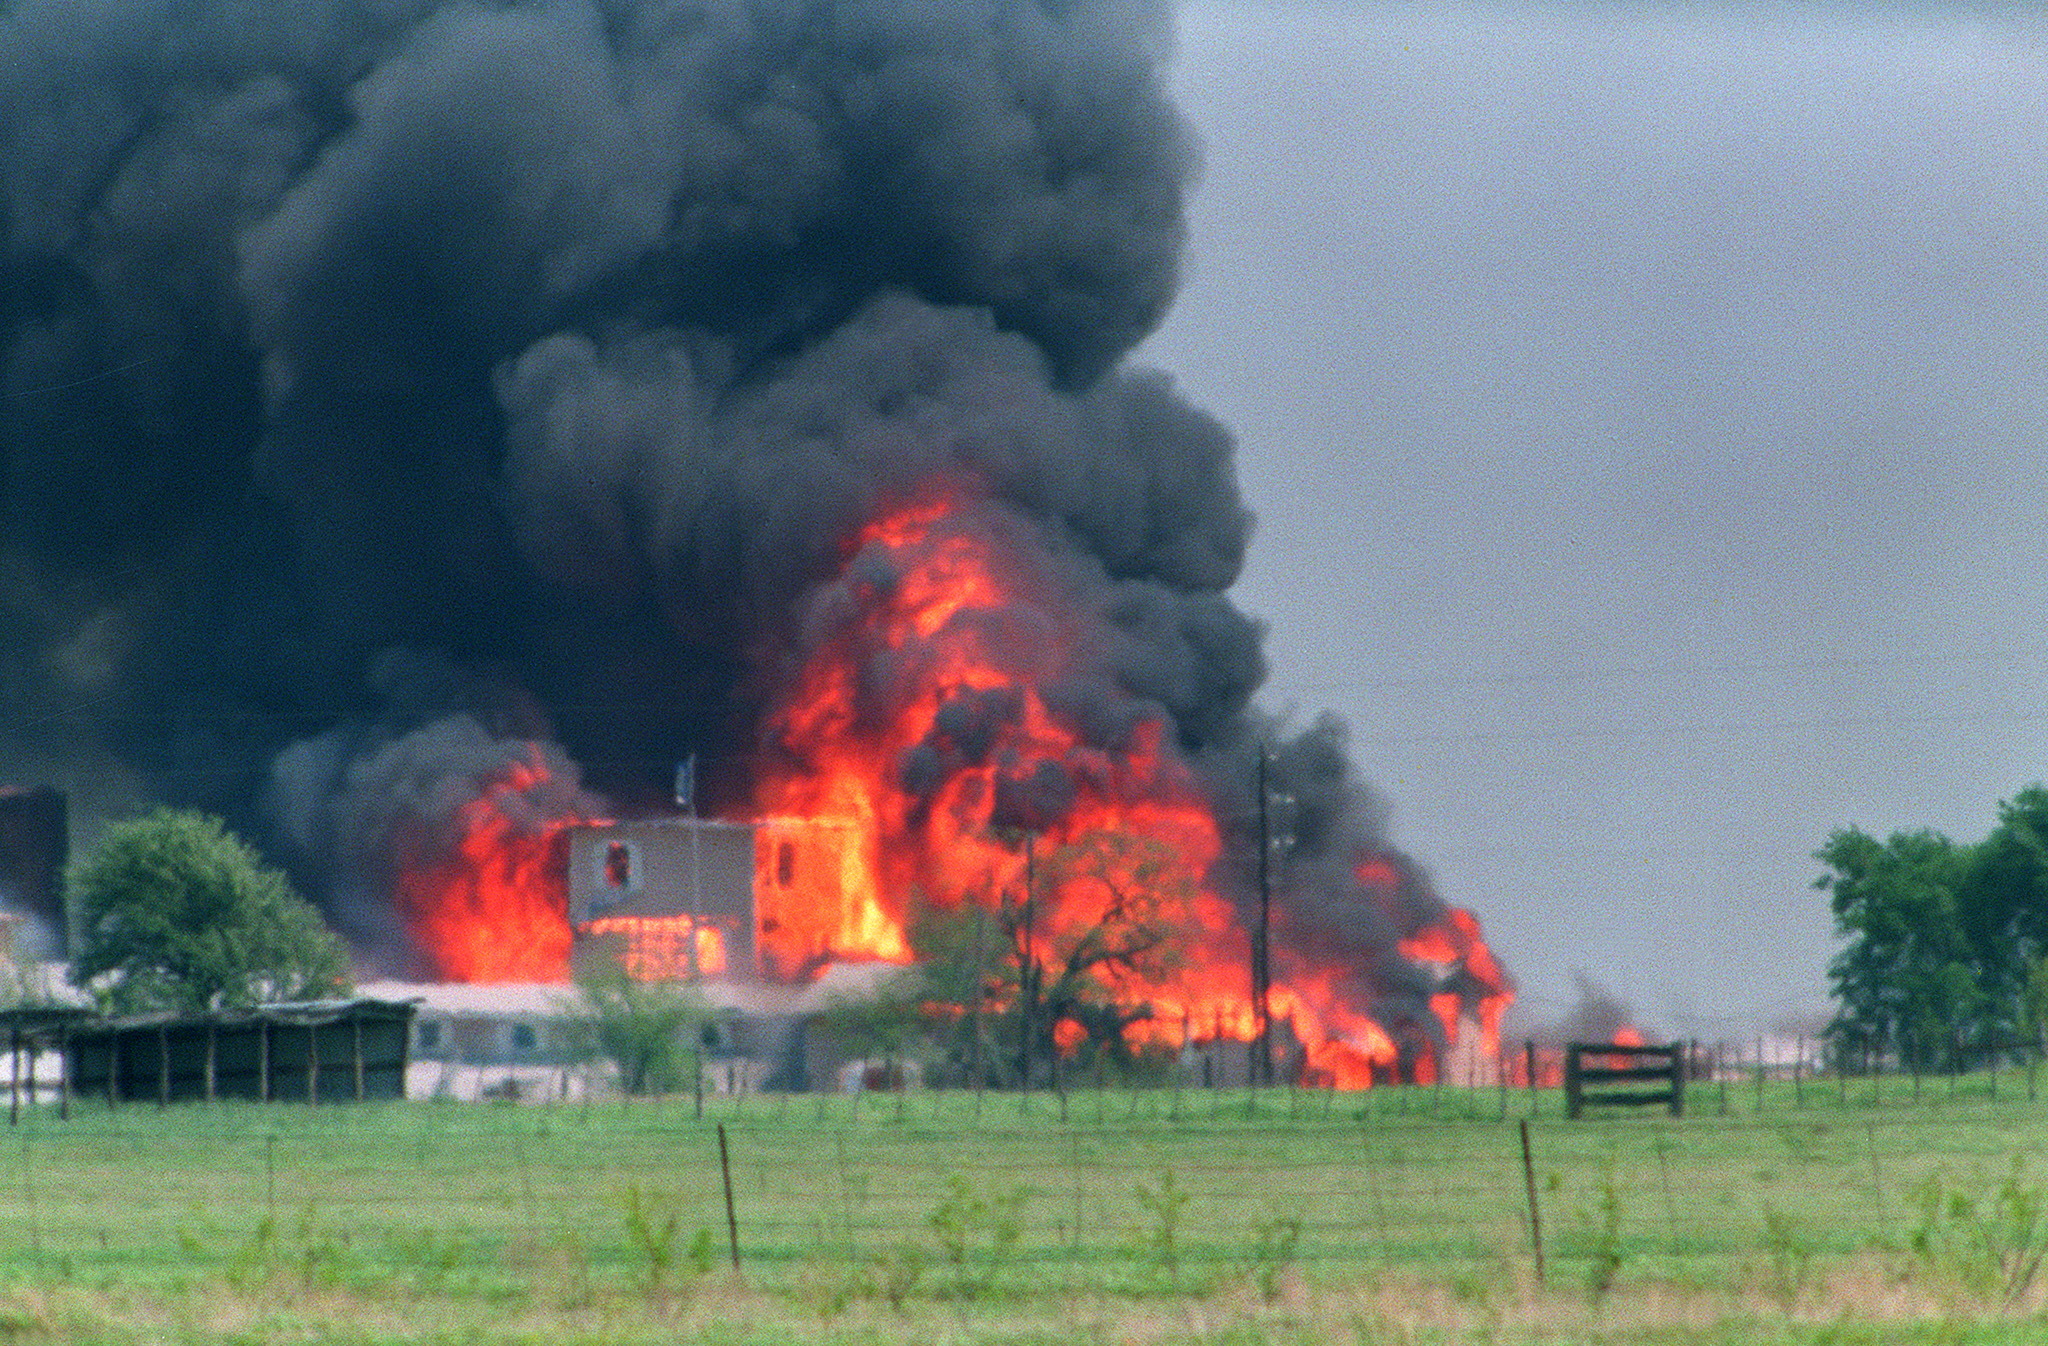 PHOTO: The Branch Davidian Compound observation tower shown engulfed in flames after a fire started inside the compound, killing Koresh and 80 of his followers on April 19, 1993 in Waco, Texas.